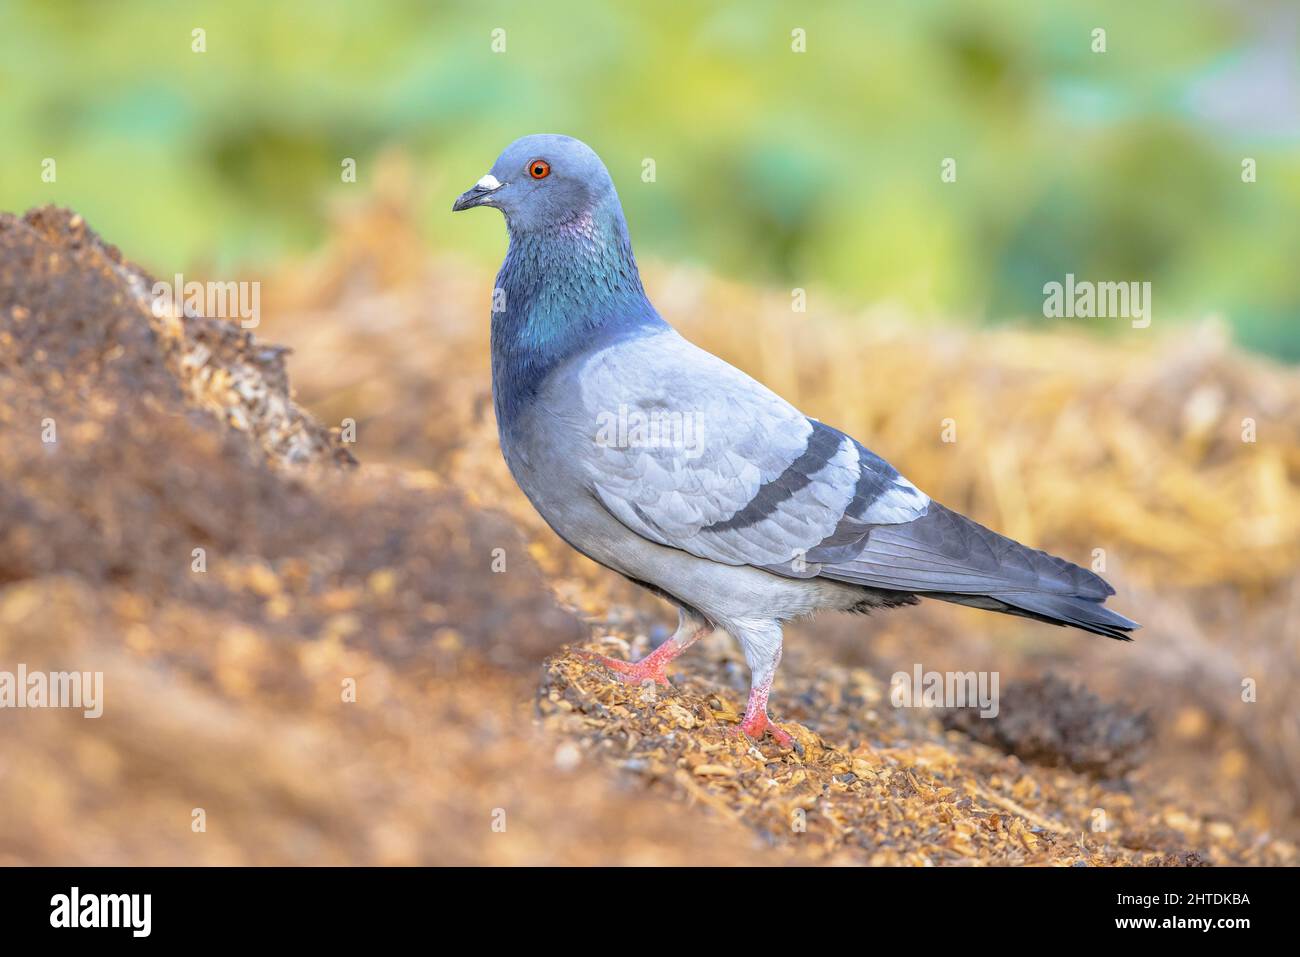 European rock dove (Columba livia). This bird occurs in the wild in Europe, Africa and Asia. Nowadays it can be found Worldwide as the Domestic Pigeon Stock Photo